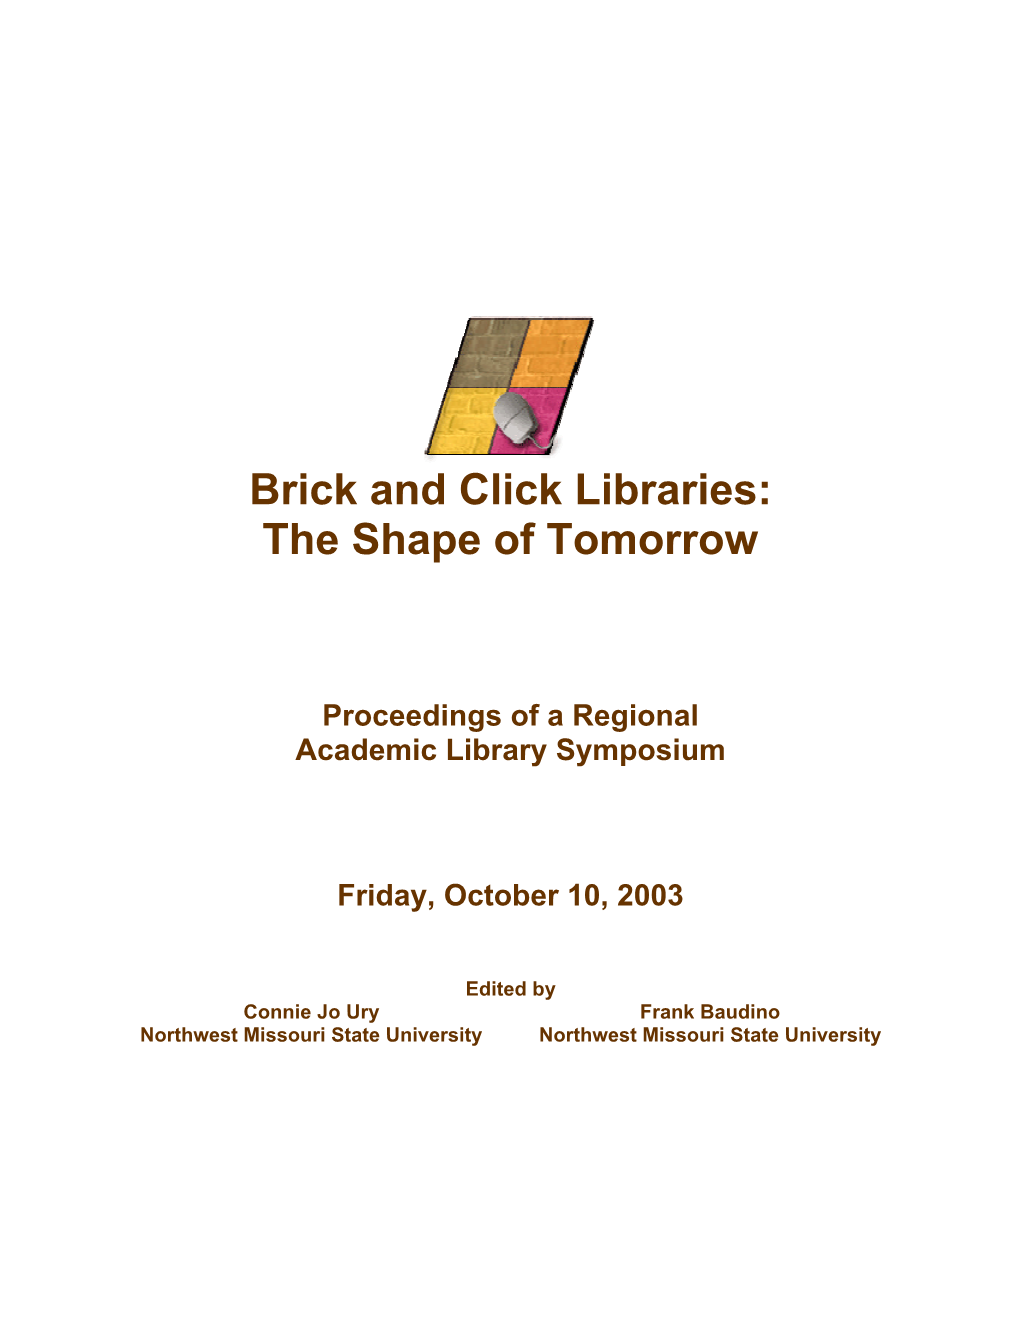 Brick and Click Libraries: the Shape of Tomorrow